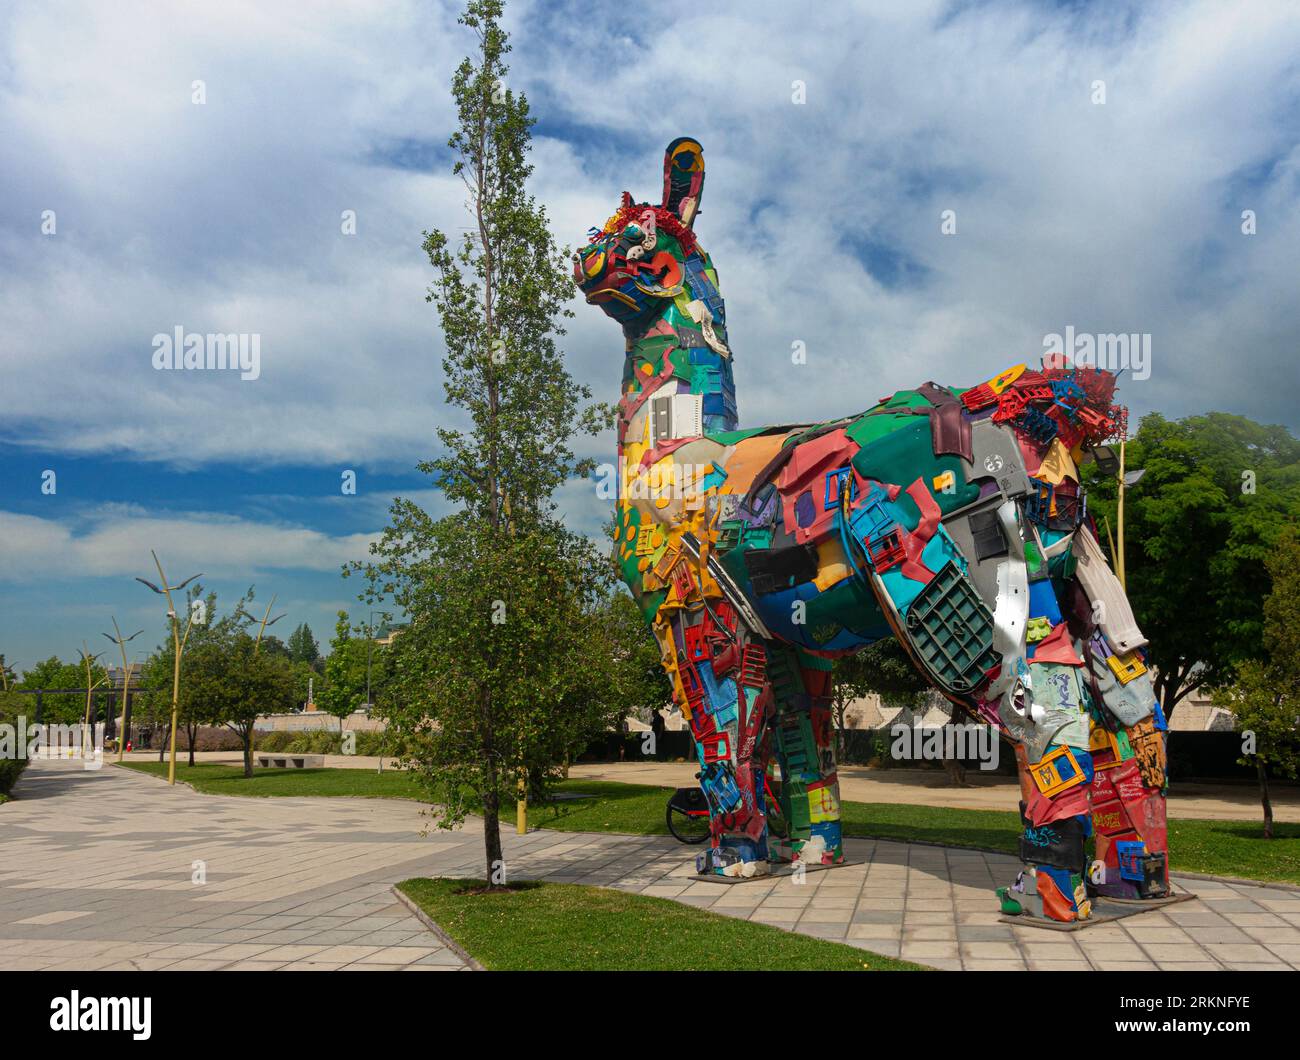 Llama Andina, an artwork created out of recycled materials by the Portuguese artist Bordalo II, in Parque Titanium in the Sanhattan, Santiago,Chile. Stock Photo